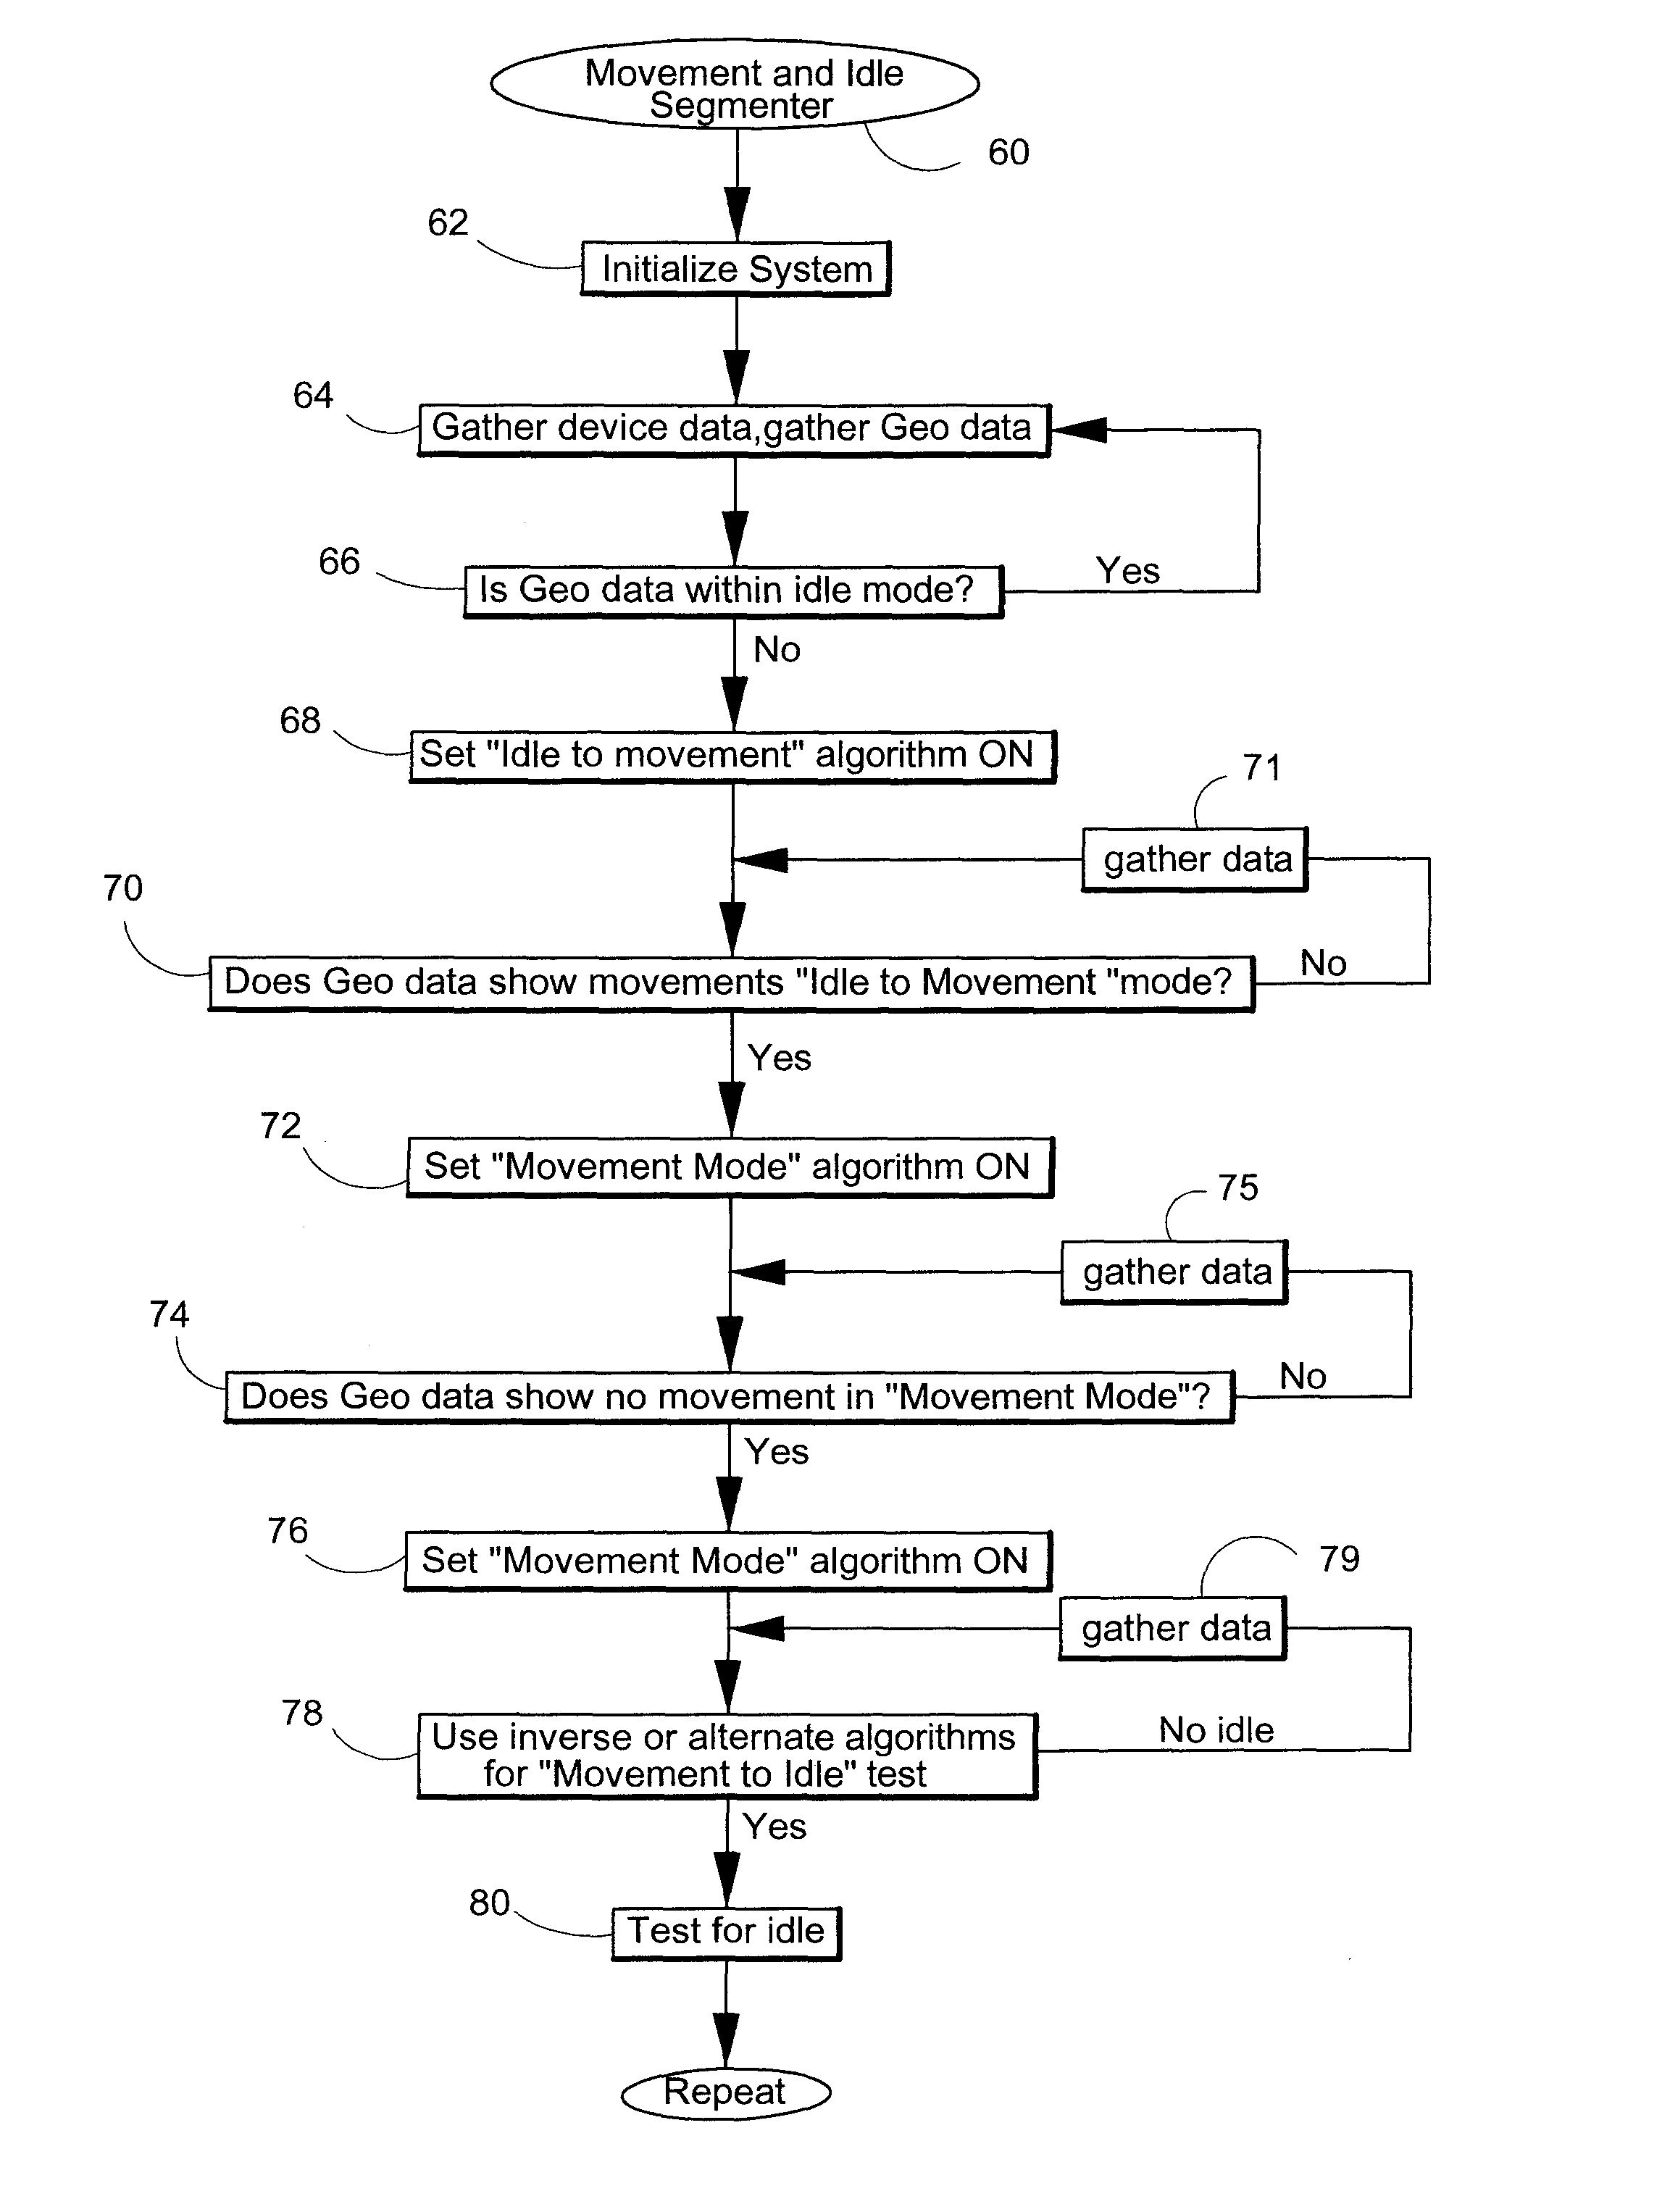 Method and system to record and visualize type, path and location of moving and idle segments